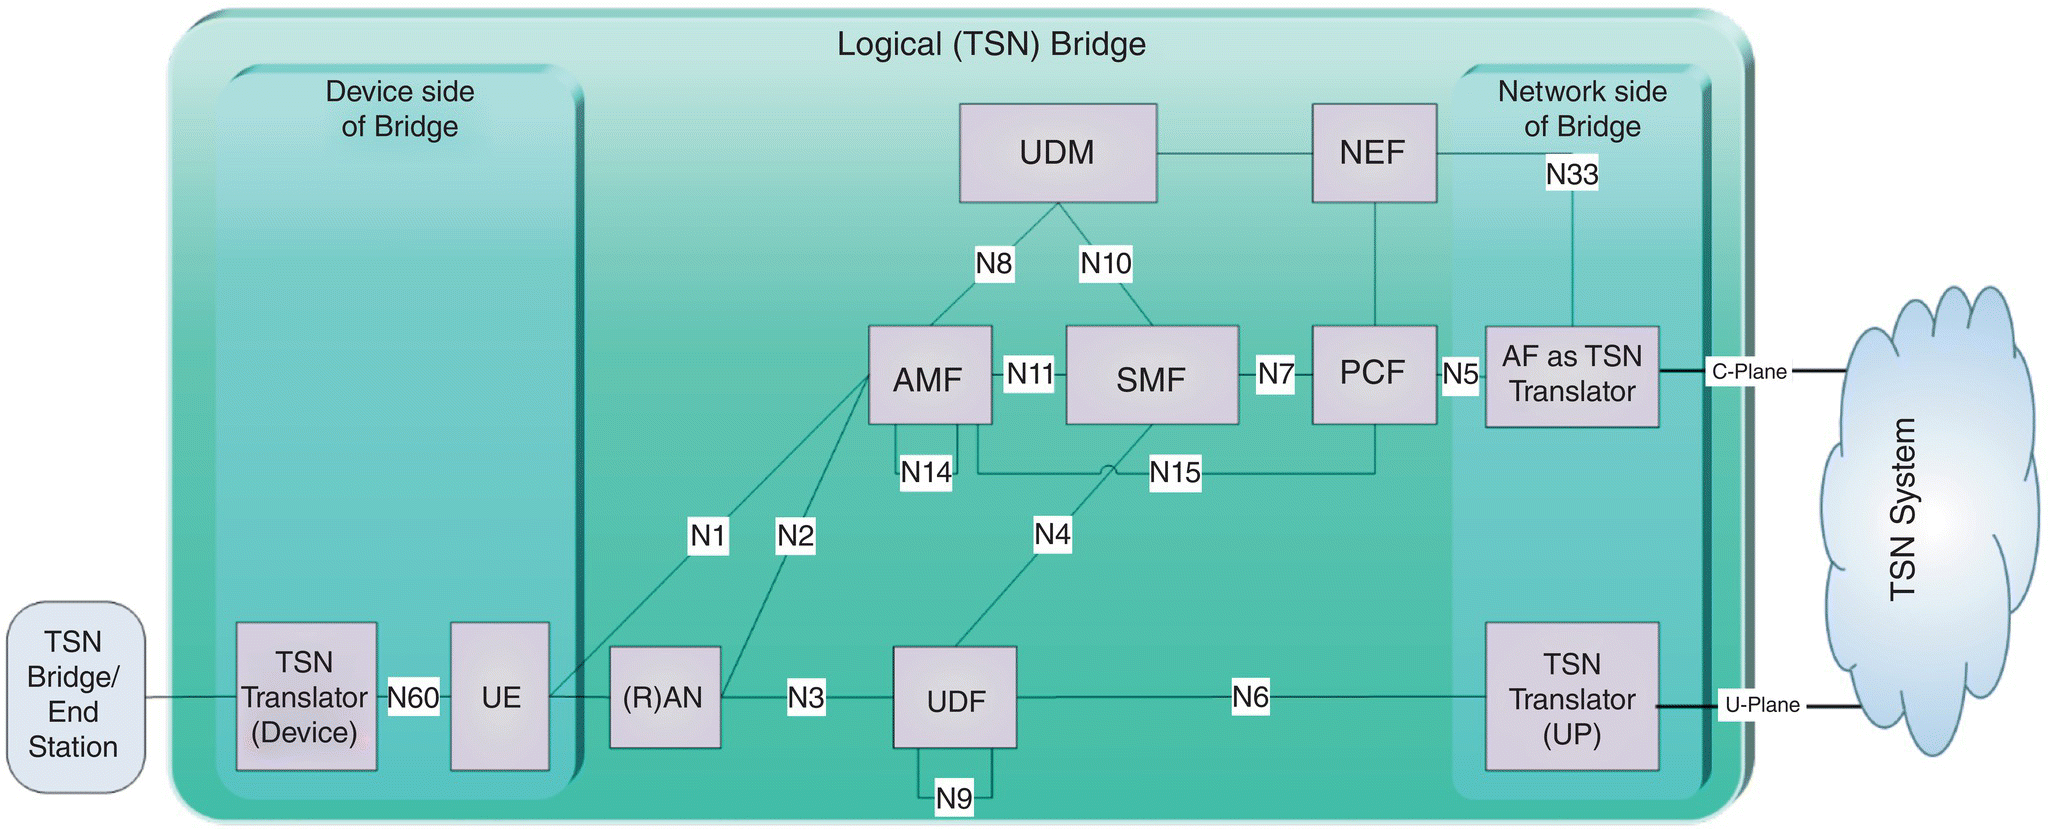 Schematic of TSN integration support with TSN translator outside the UPF displaying a panel for logical (TSN) bridge with two smaller panels for the device side of bridge (left) and network side of bridge (right).